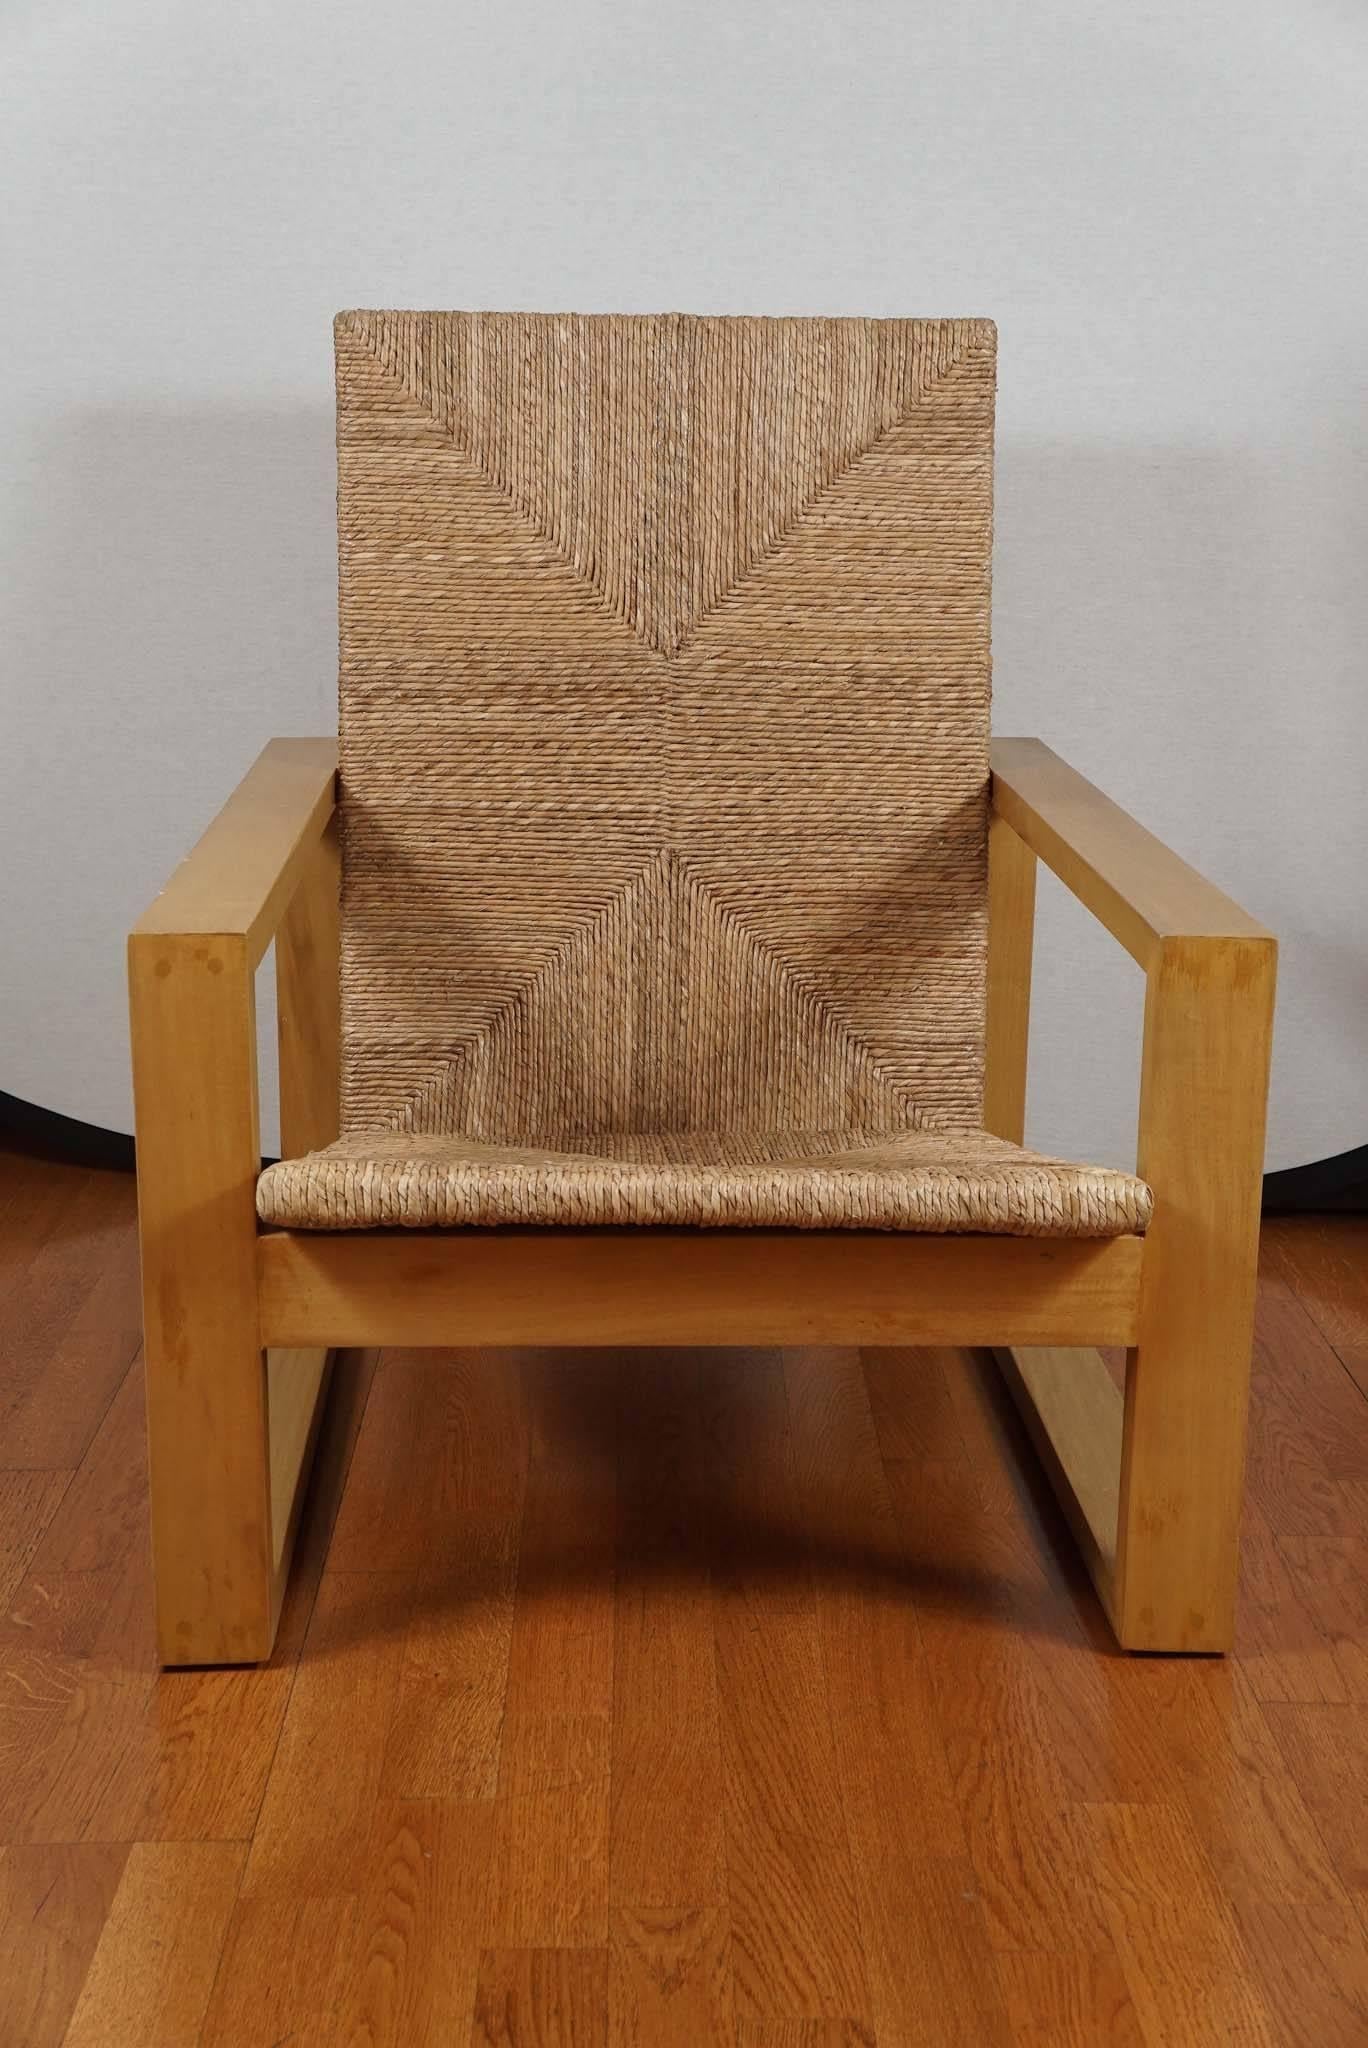 Modern square armchair, shown in blonde primavera wood with a natural rush seat and back. Also available in ebonized Rosa Marada wood, with an ebonized rattan seat.
Seat and back cushion available. COM-two yards.